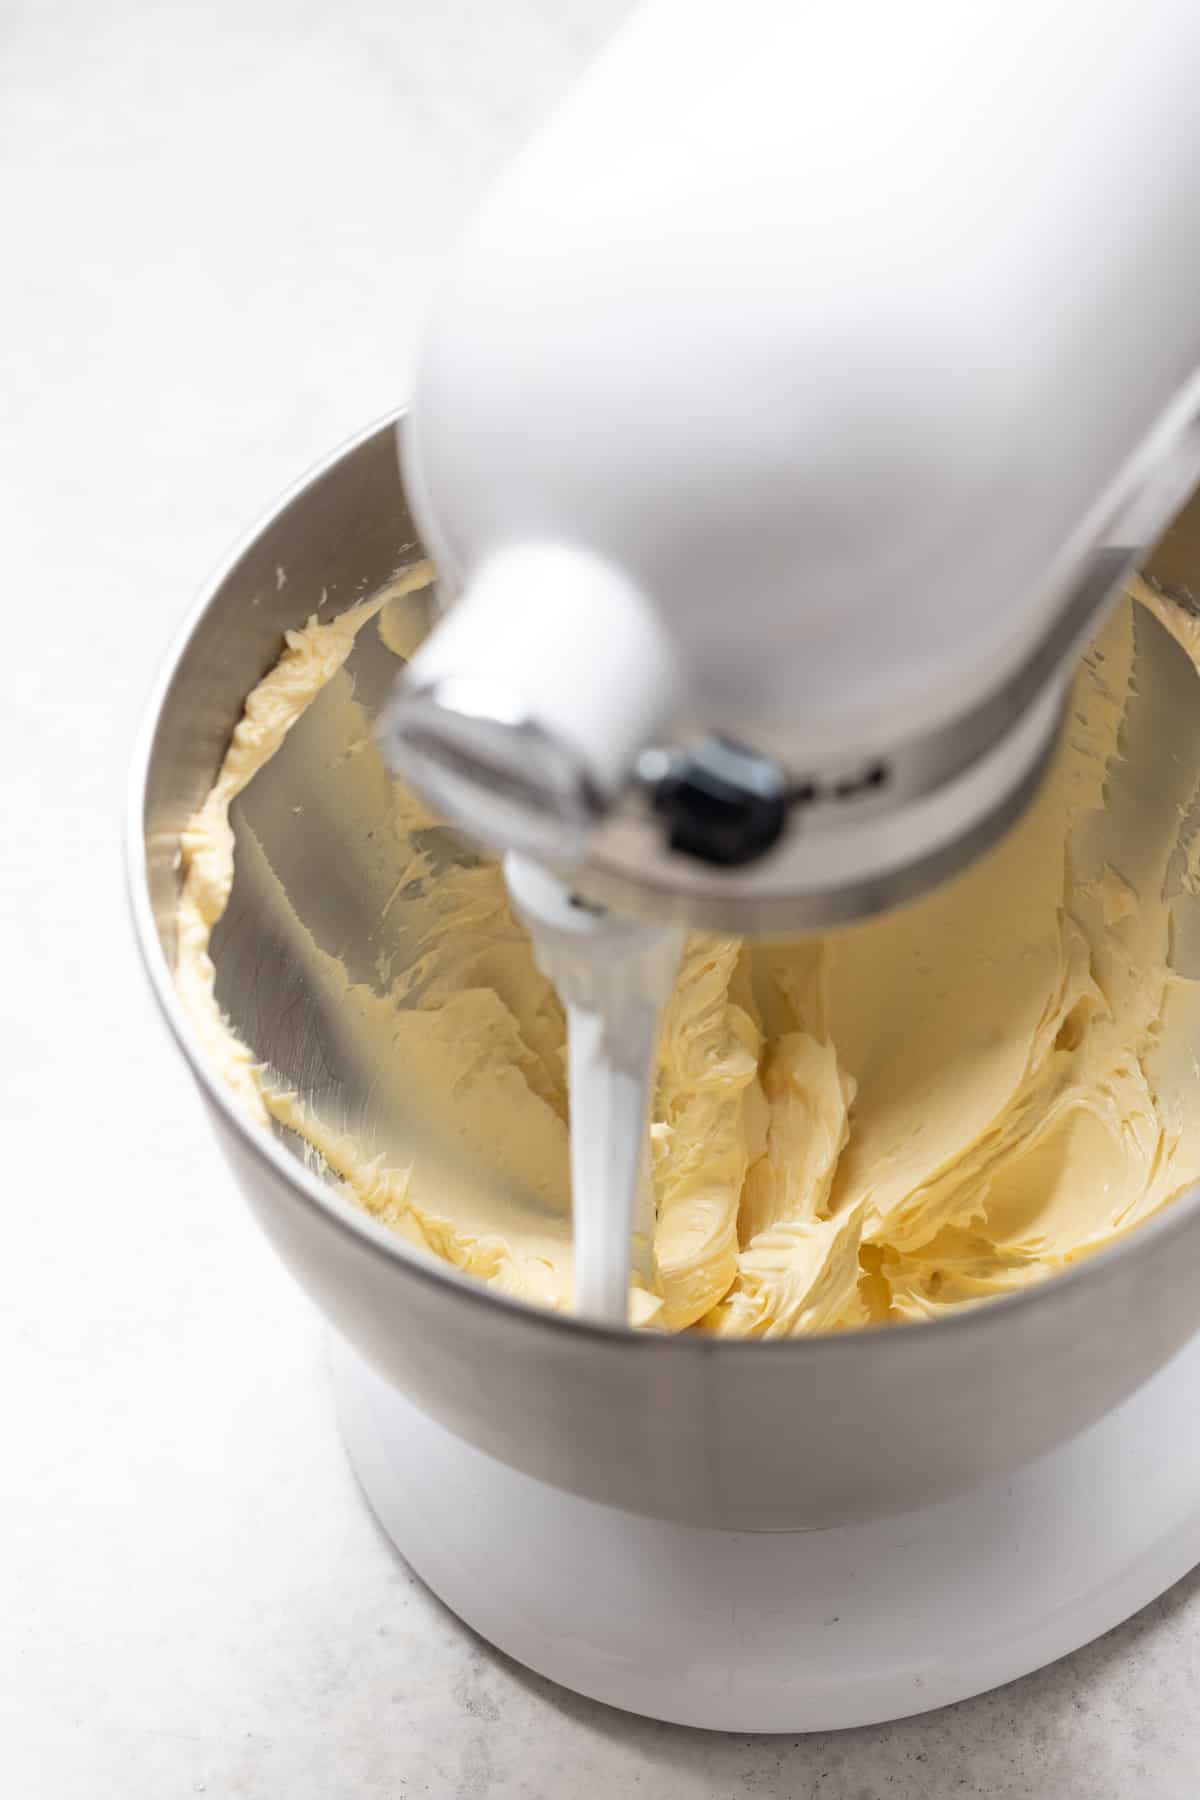 Creaming butter in a stand mixer.